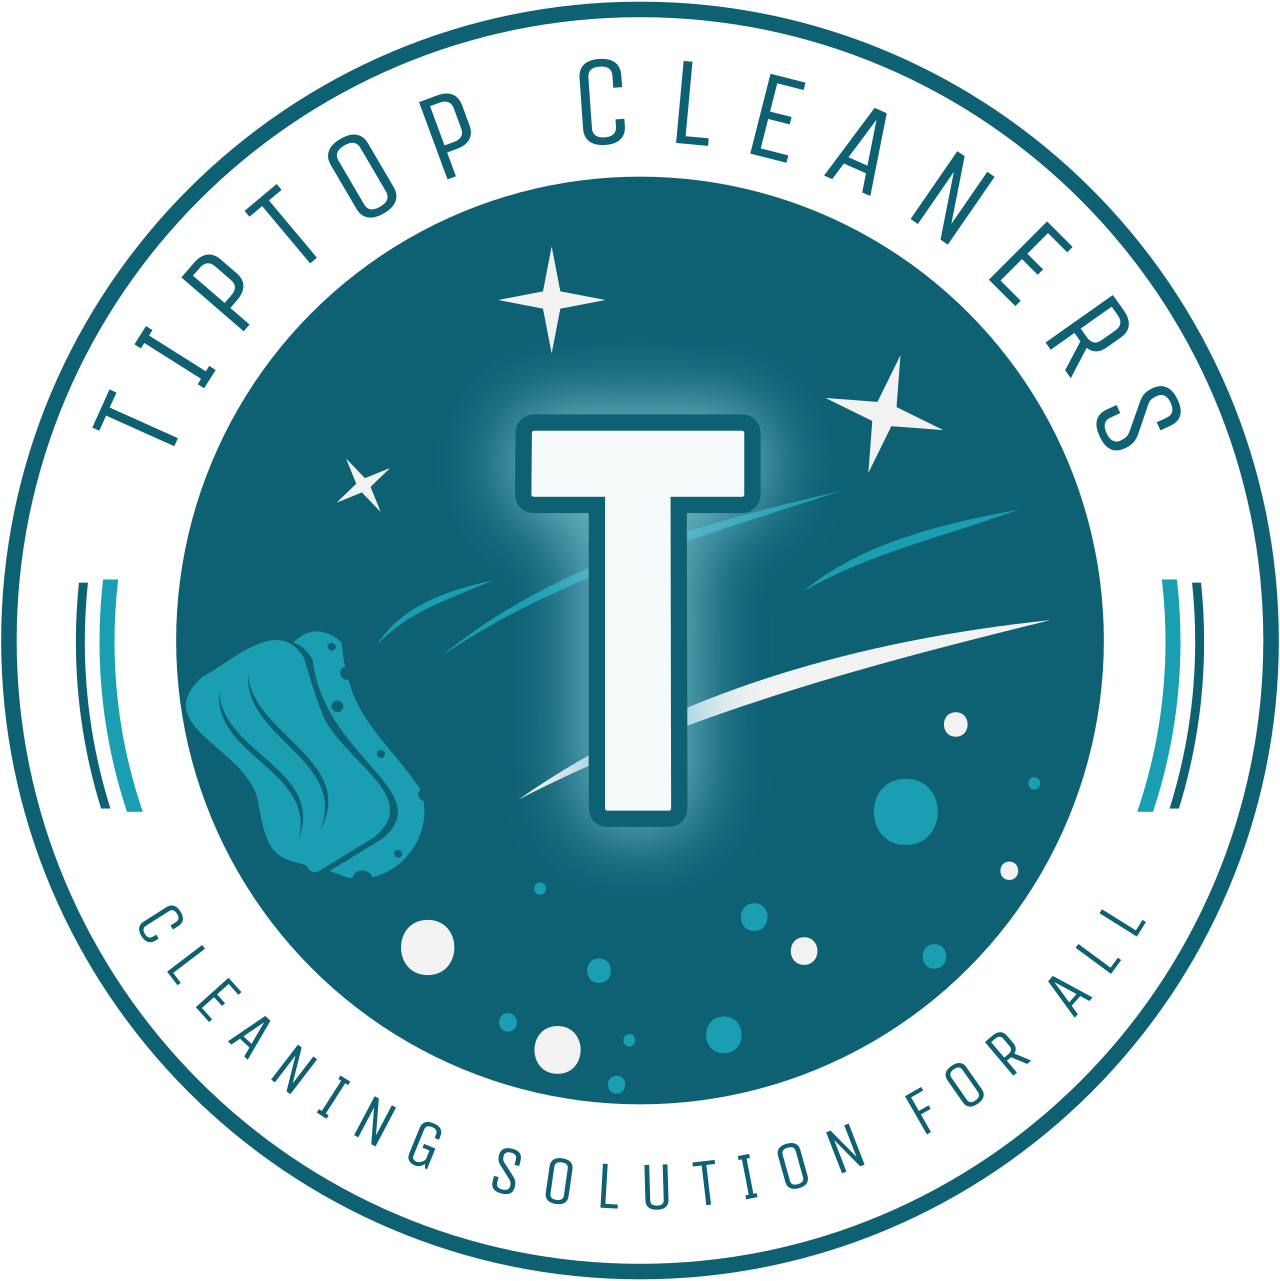 TIPTOP CLEANERS's web page